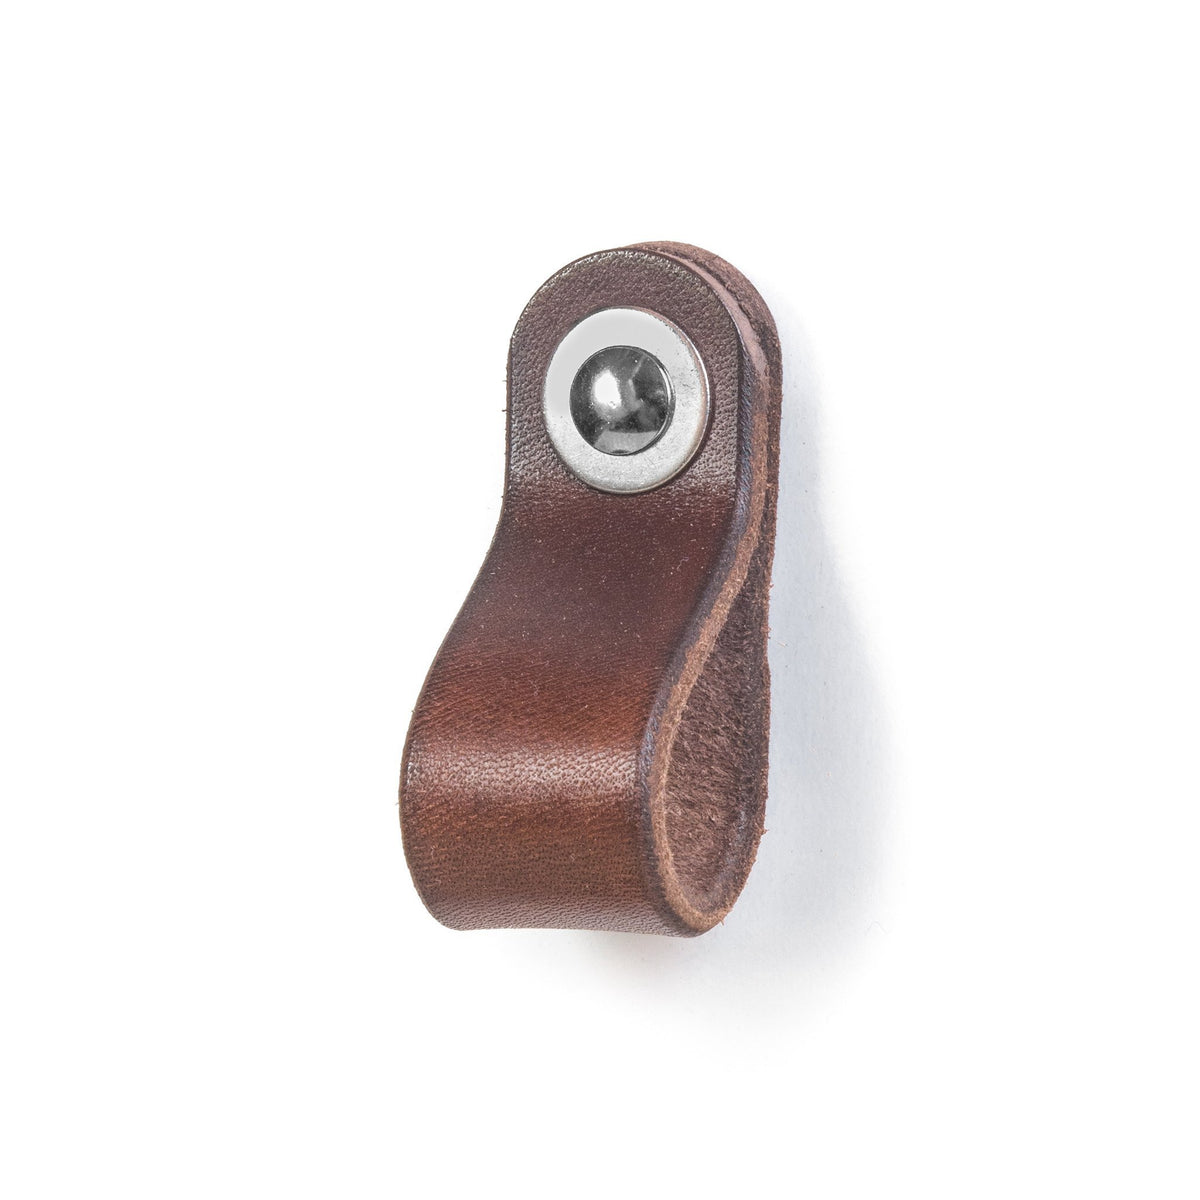 Walnut Studiolo AS-IS AS-IS SALE Leather Drawer Pull - The Hawthorne (Small)